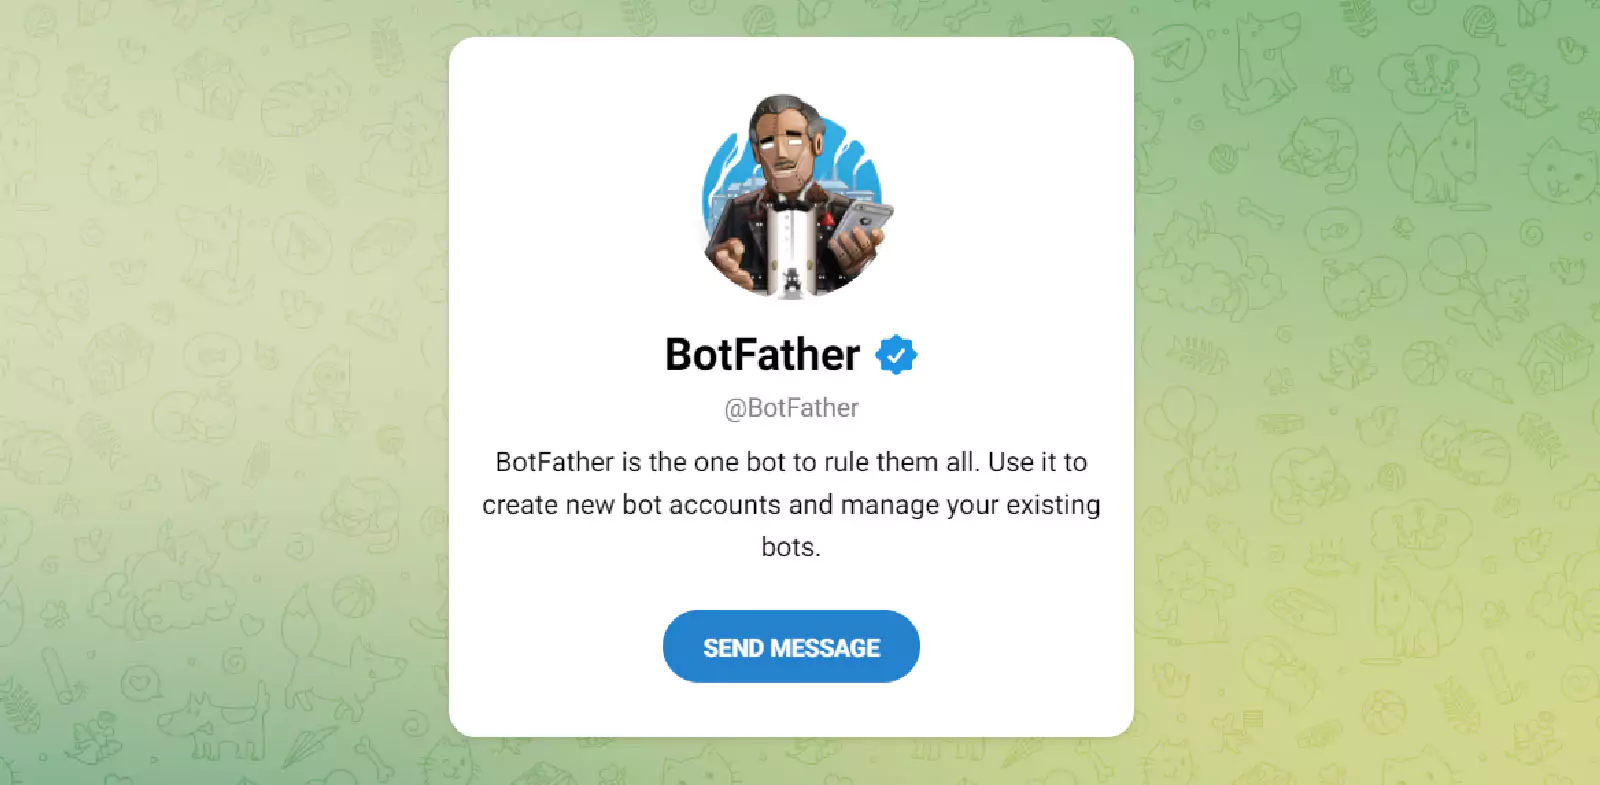 All Telegram bots are created with the help of one bot - The BotFather